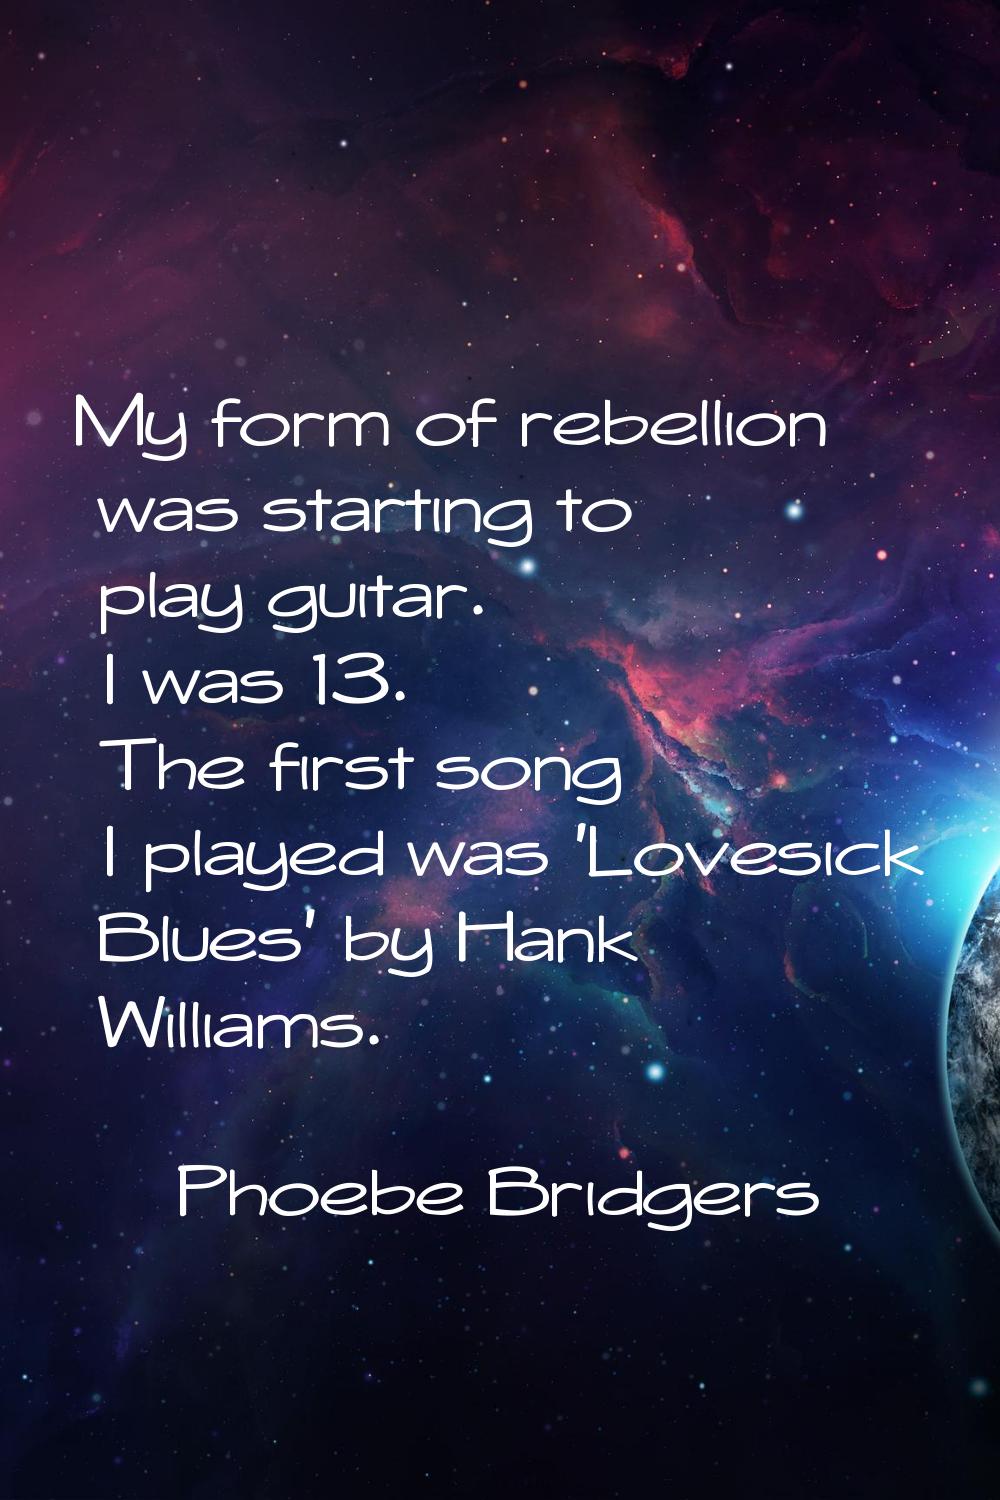 My form of rebellion was starting to play guitar. I was 13. The first song I played was 'Lovesick B